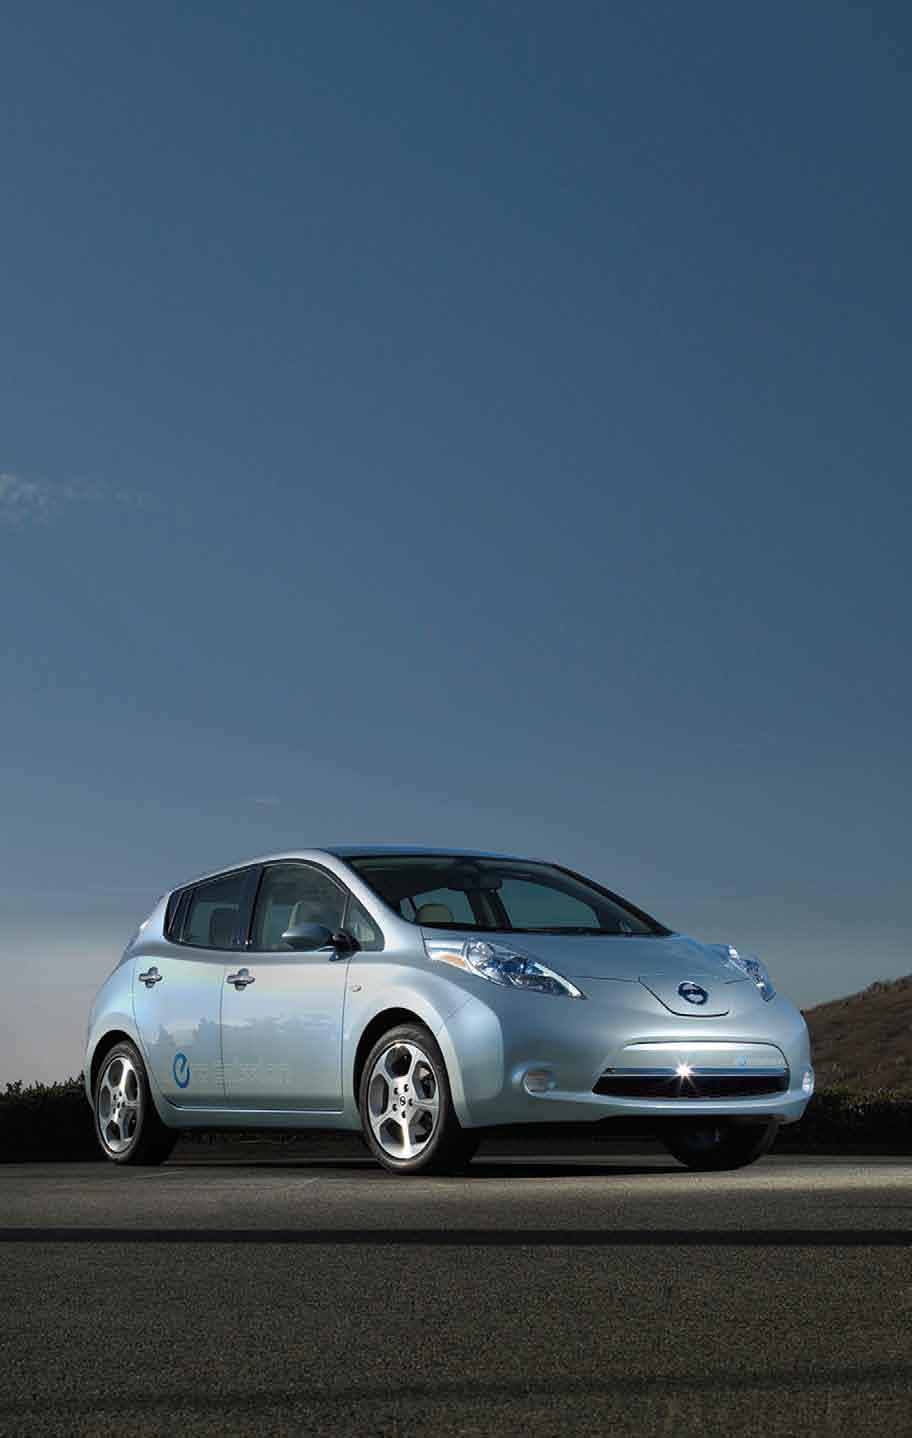 97 % electricity Percentage of survey respondents who are Nissan Leaf owners Nissan Leaf drivers dominate the Round 1 and Round 2 survey populations, with fully 97% of survey respondents being Leaf